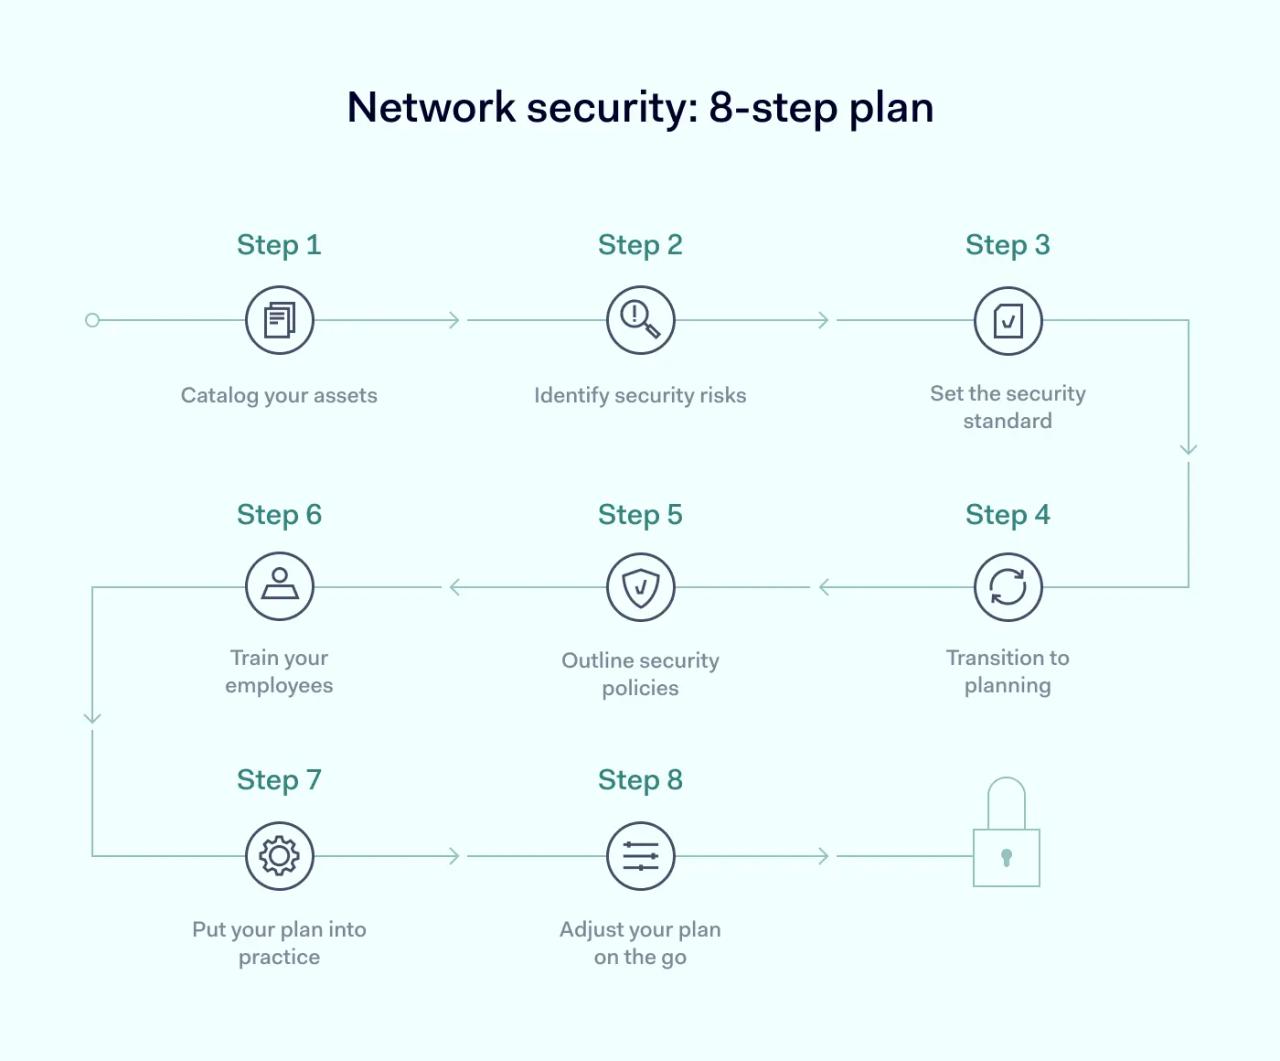 Network Security 8-step plan illustrated